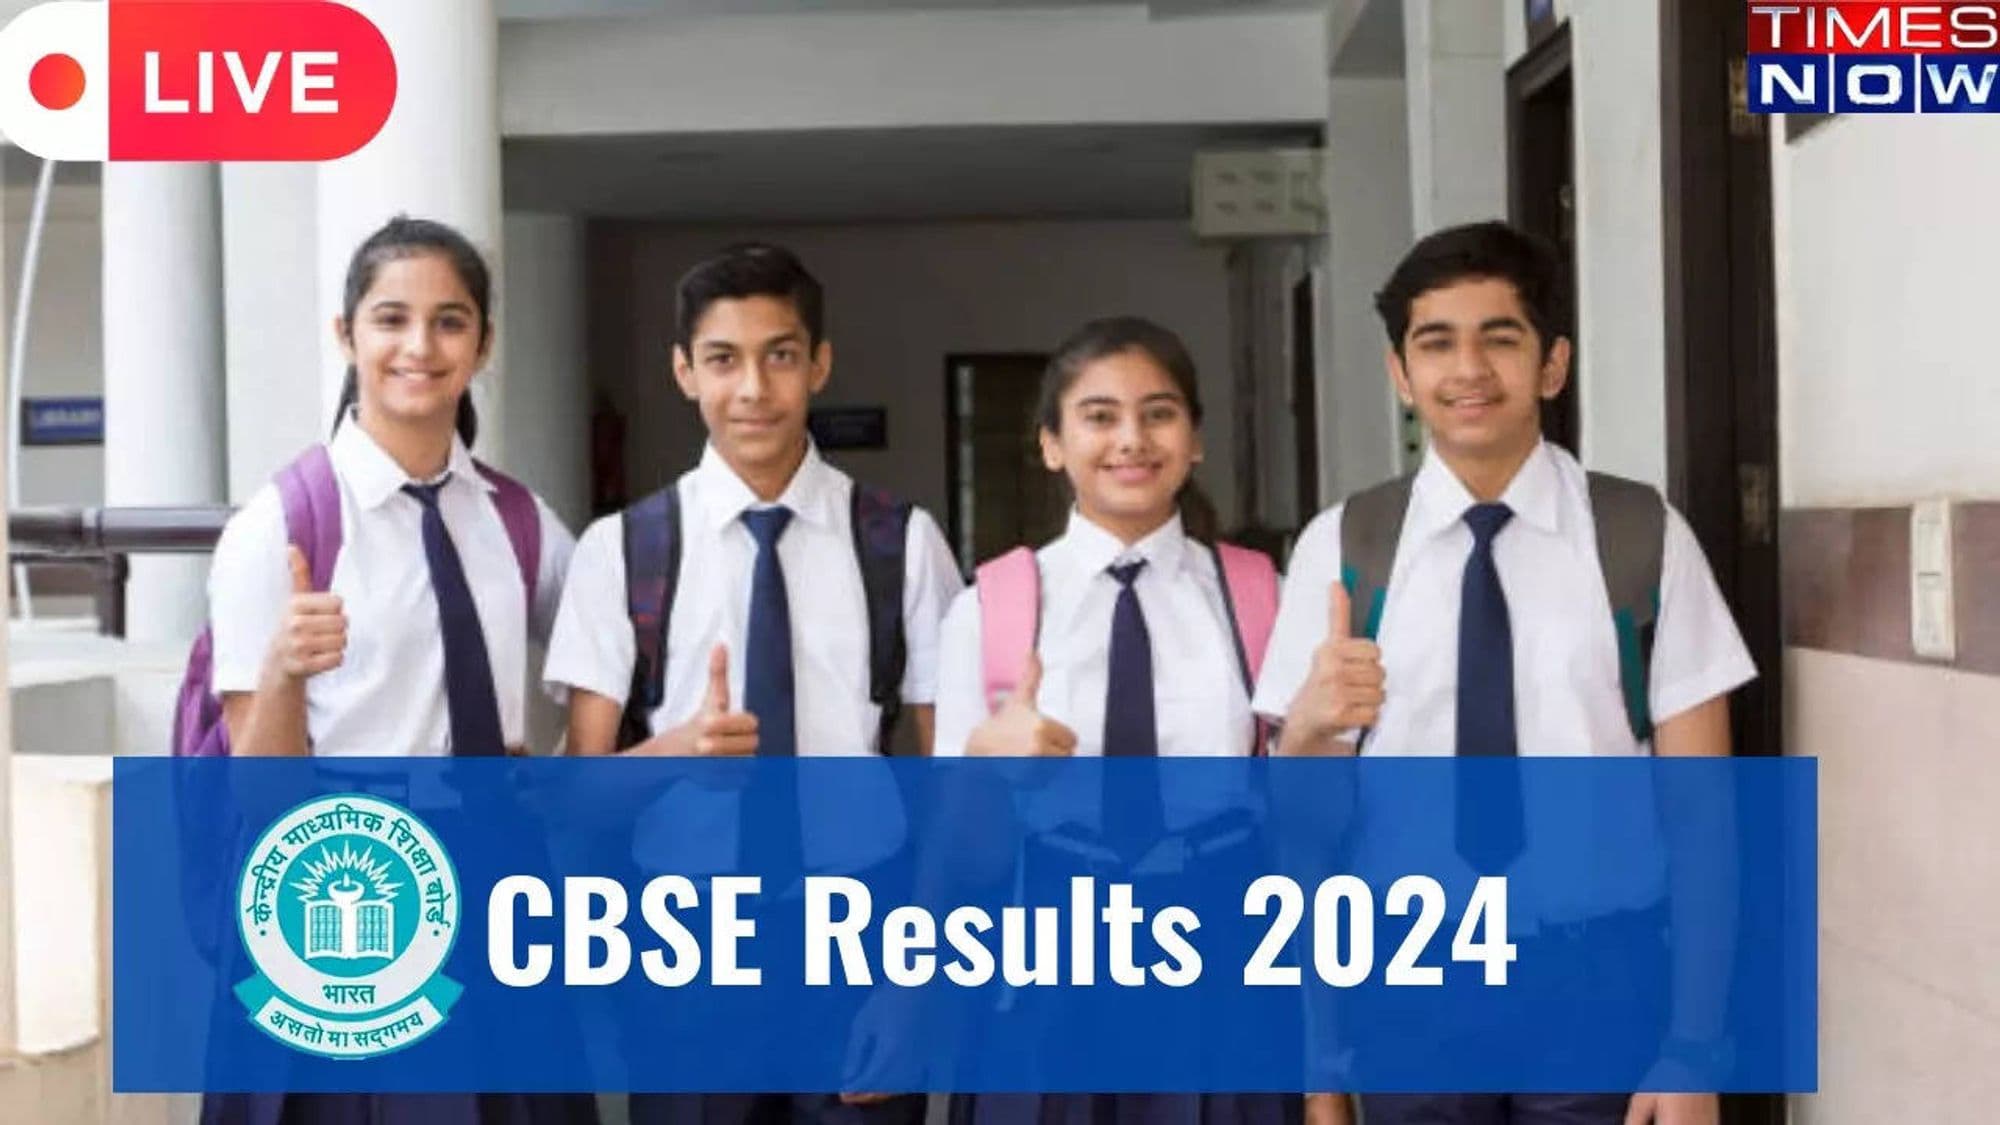 CBSE to Announce Class 10 and 12 Results in May 2024: What Students Need to Know